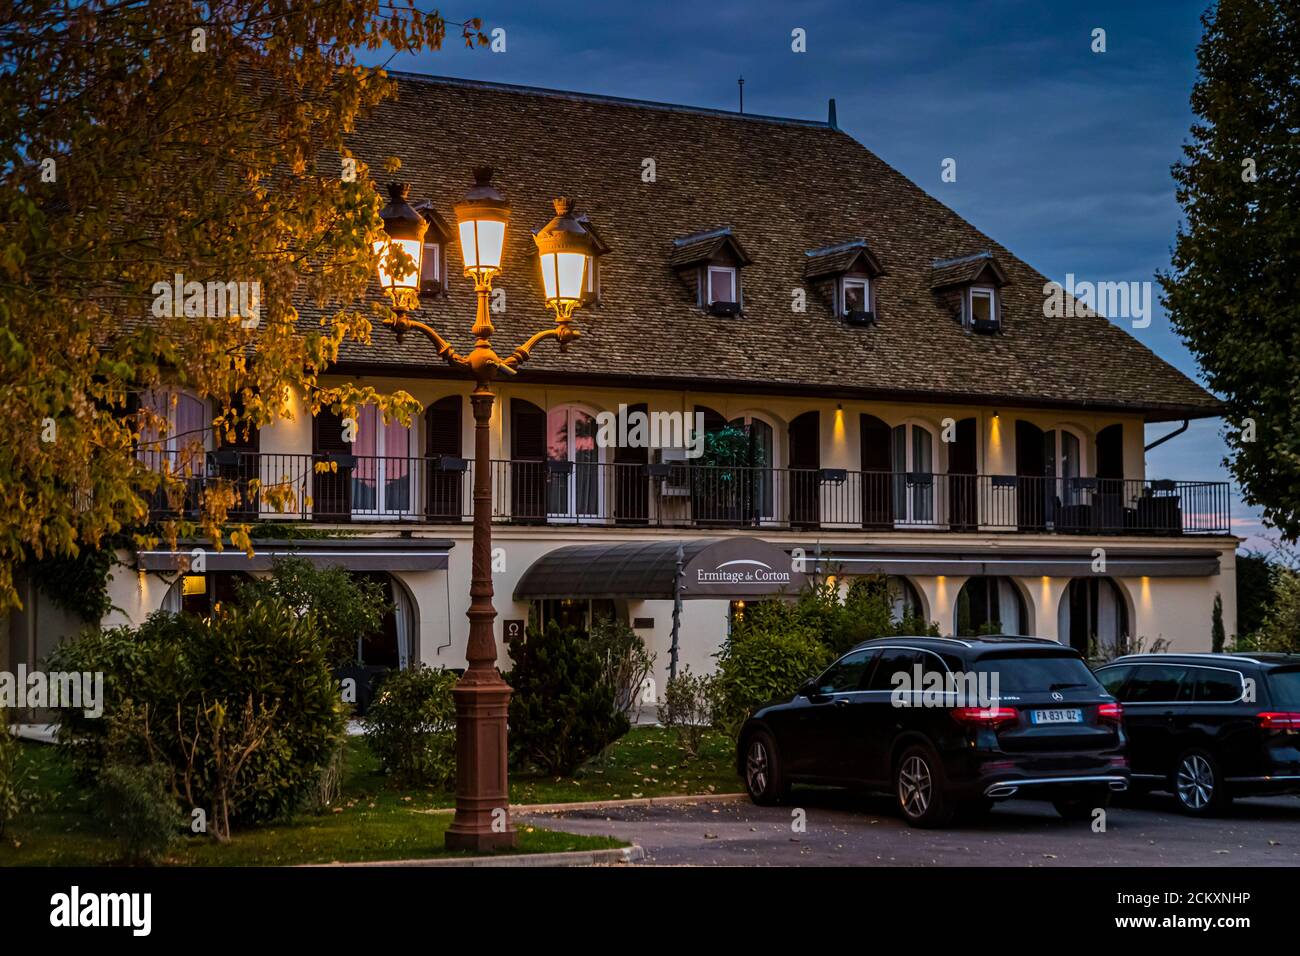 In the middle of the vineyards and at the gates of Beaune: the Hotel Ermitage de Corton. Across the street is the famous Corton vineyard. On it grow both white and red grape varieties. Beaune, France Stock Photo